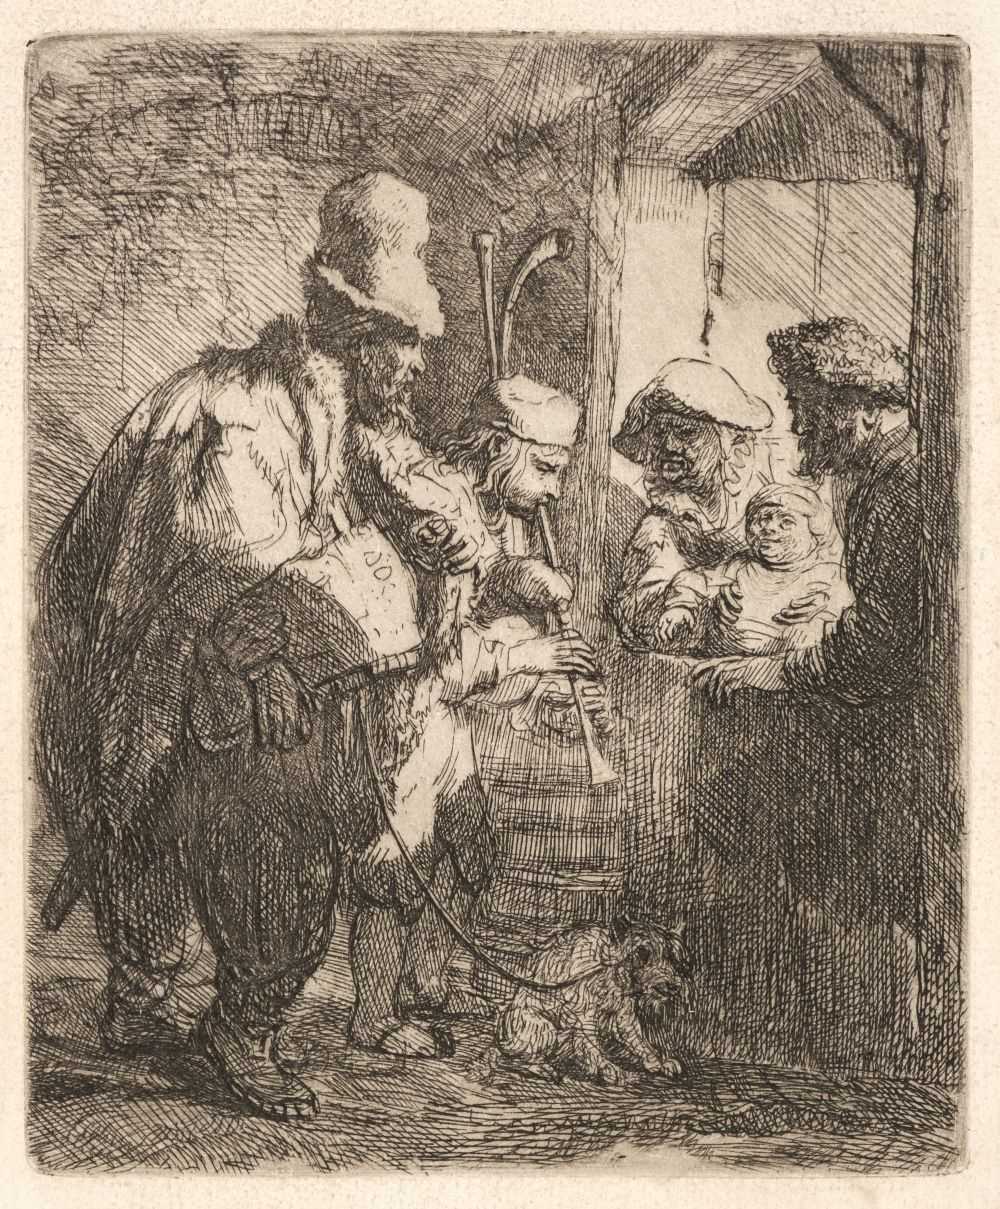 Lot 73 - Rembrandt (1606-1669), The Strolling Musicians, etching, circa 1635